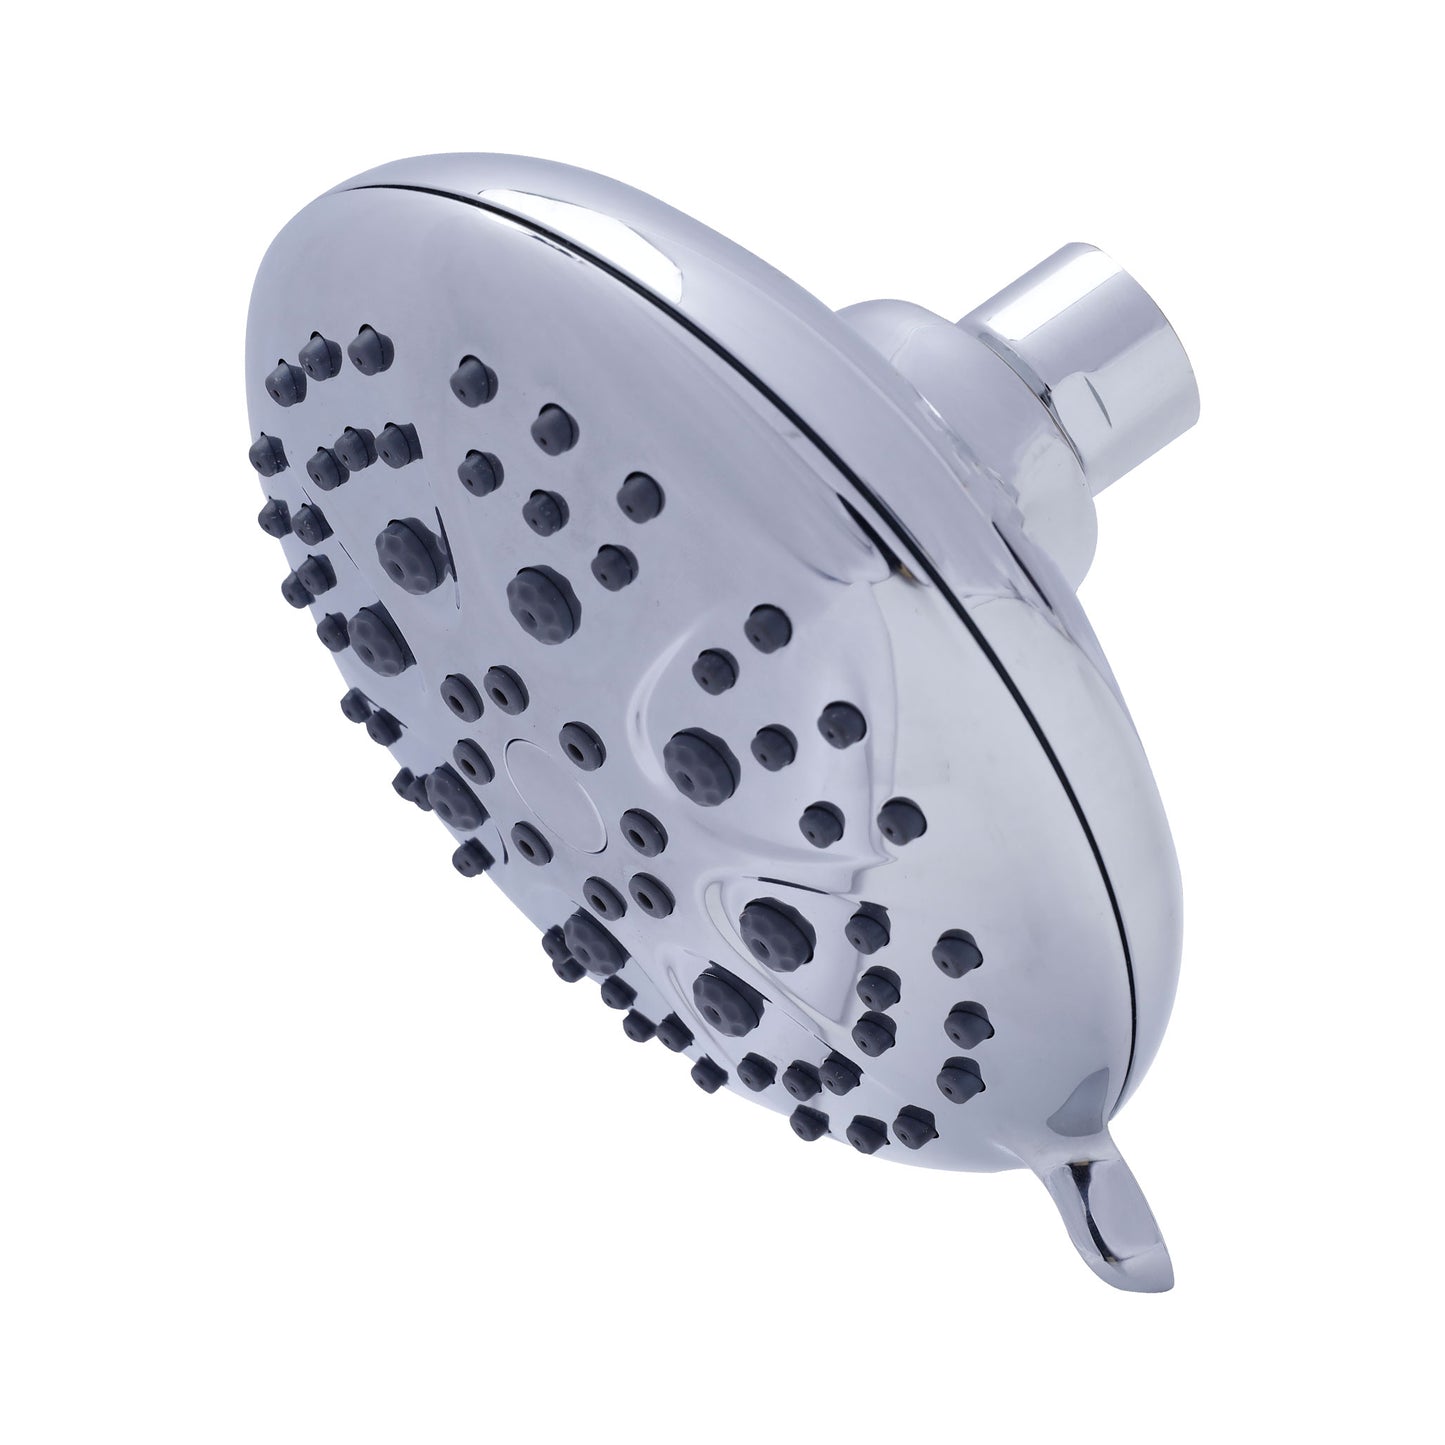 Shower filter with Overhead shower MS 125 (6 spray setting) with shower arm 6 inch | Protect from hard water | Complete bath set